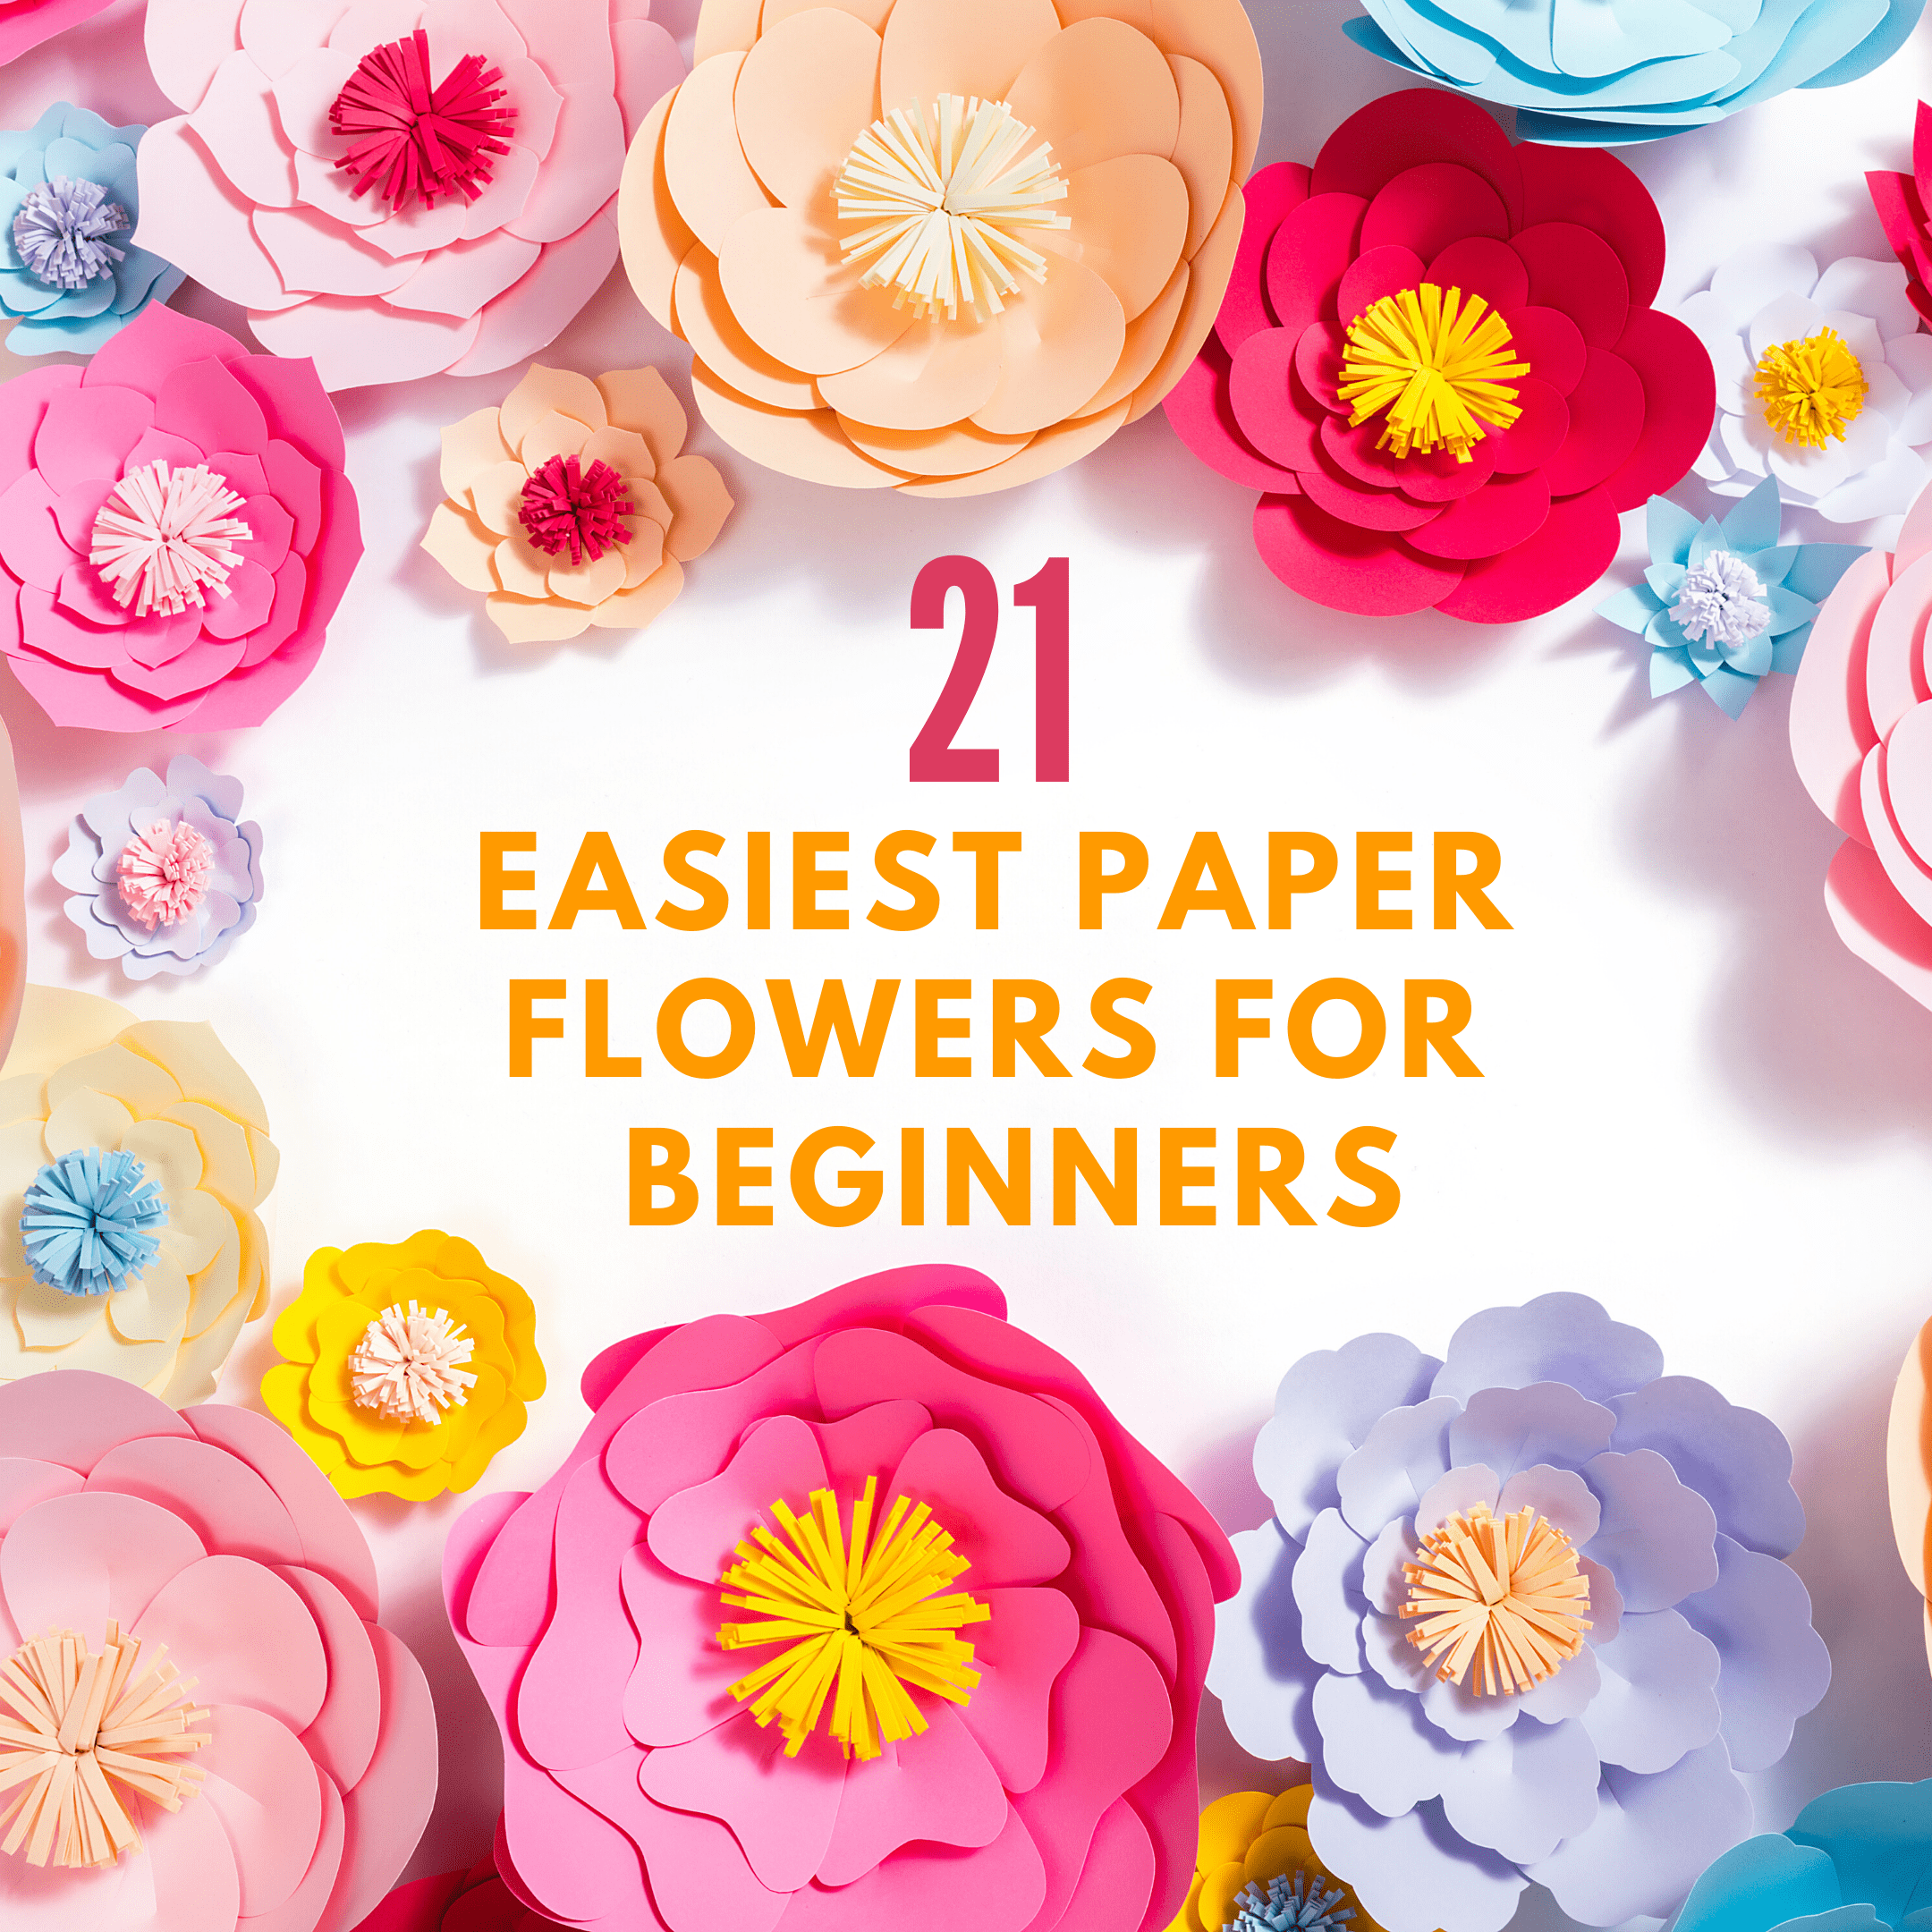 21 Easy Paper Flowers – The Best Flower Templates for Beginners